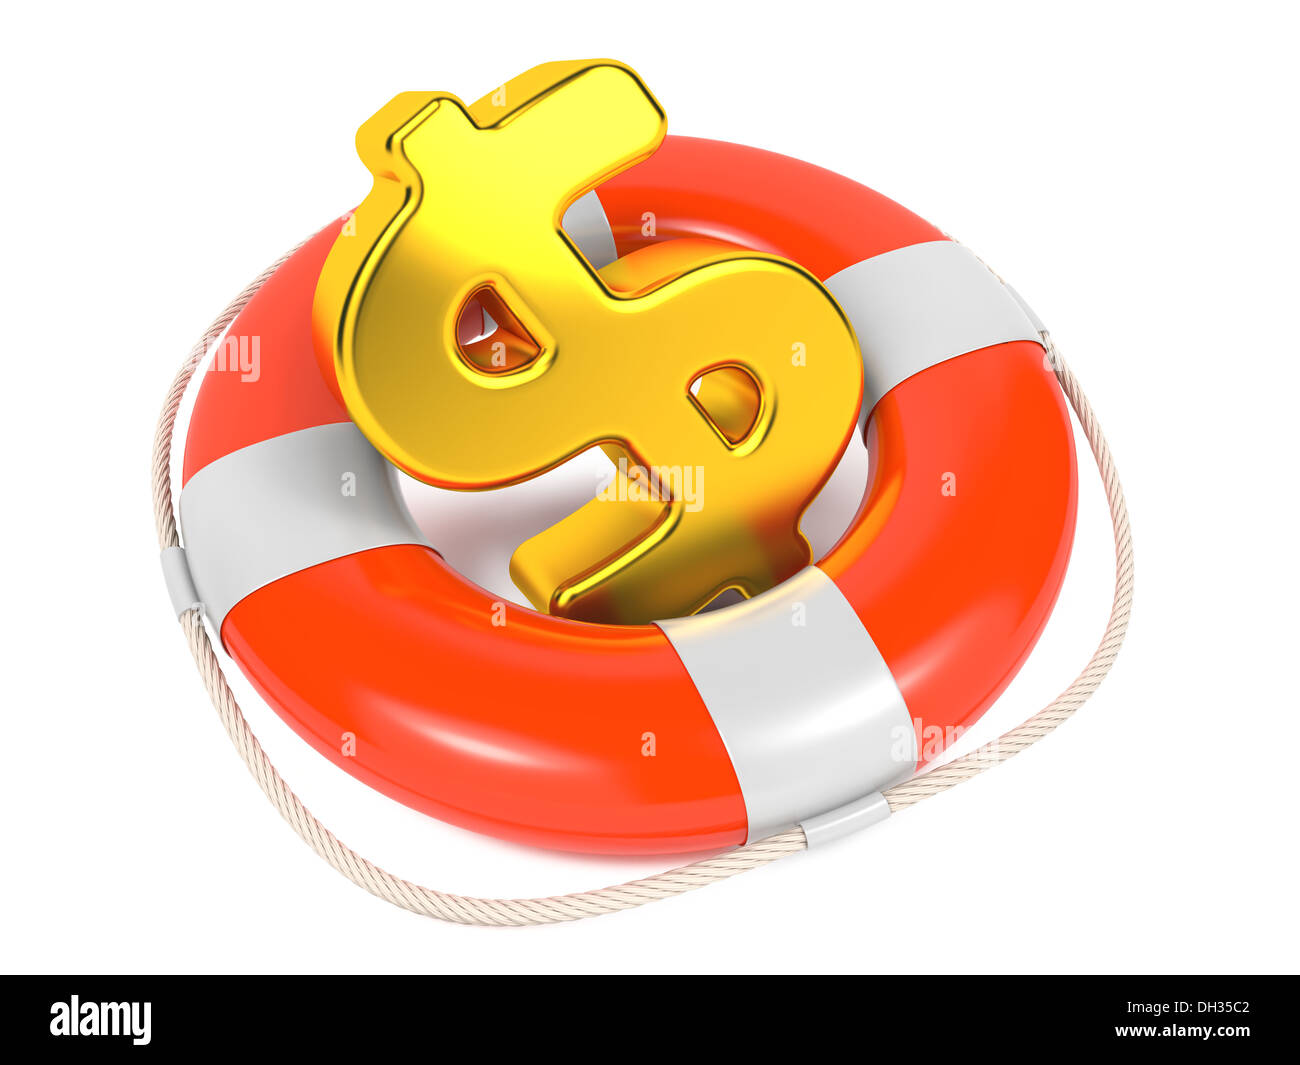 Dollar Sign in Red Lifebuoy. Isolated on White. Stock Photo